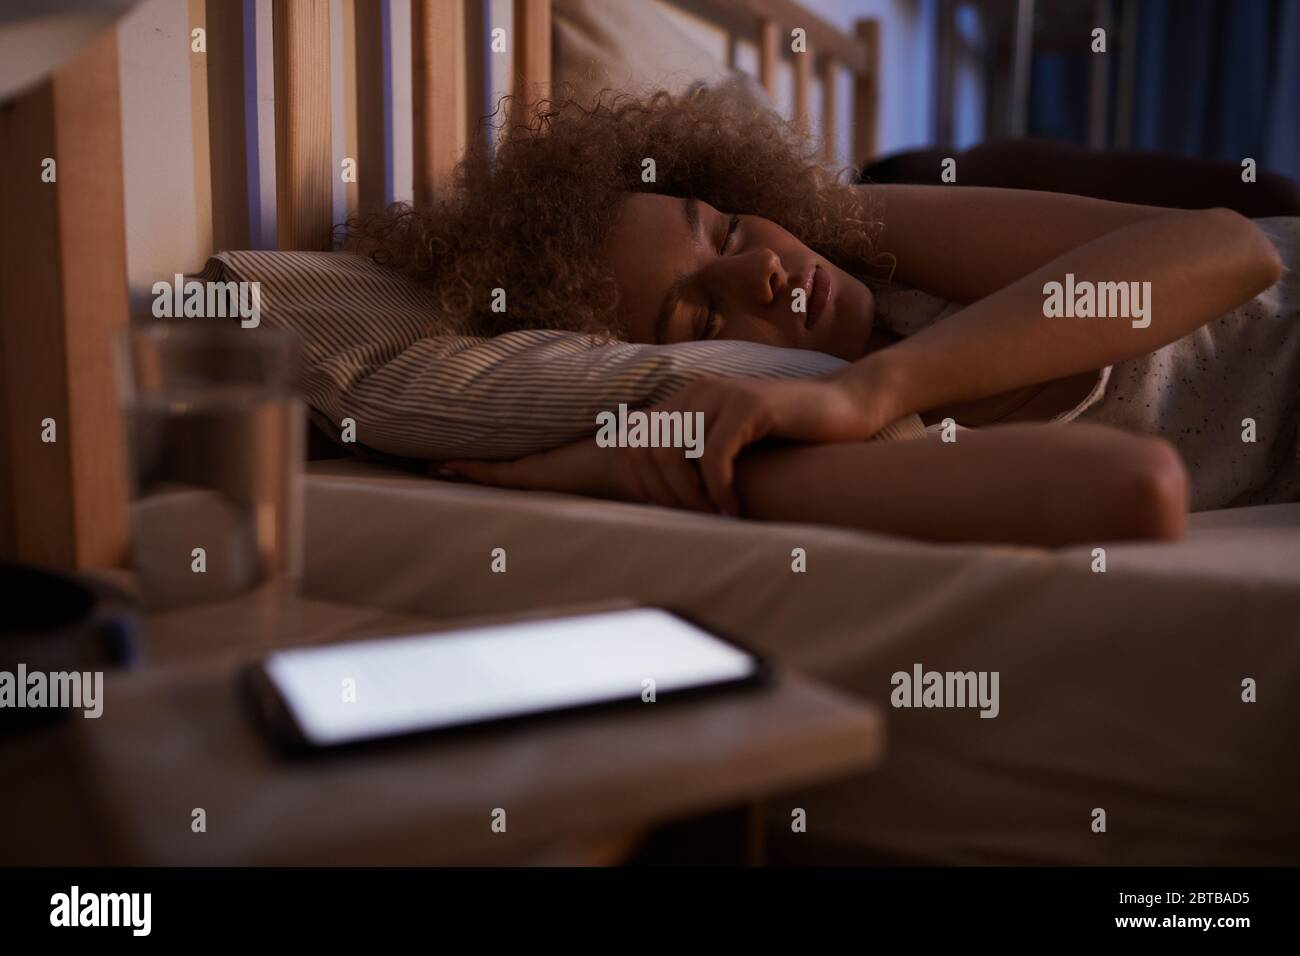 Portrait of curly-haired young woman sleeping calmly in bed at night with lit smartphone on nightstand, copy space Stock Photo